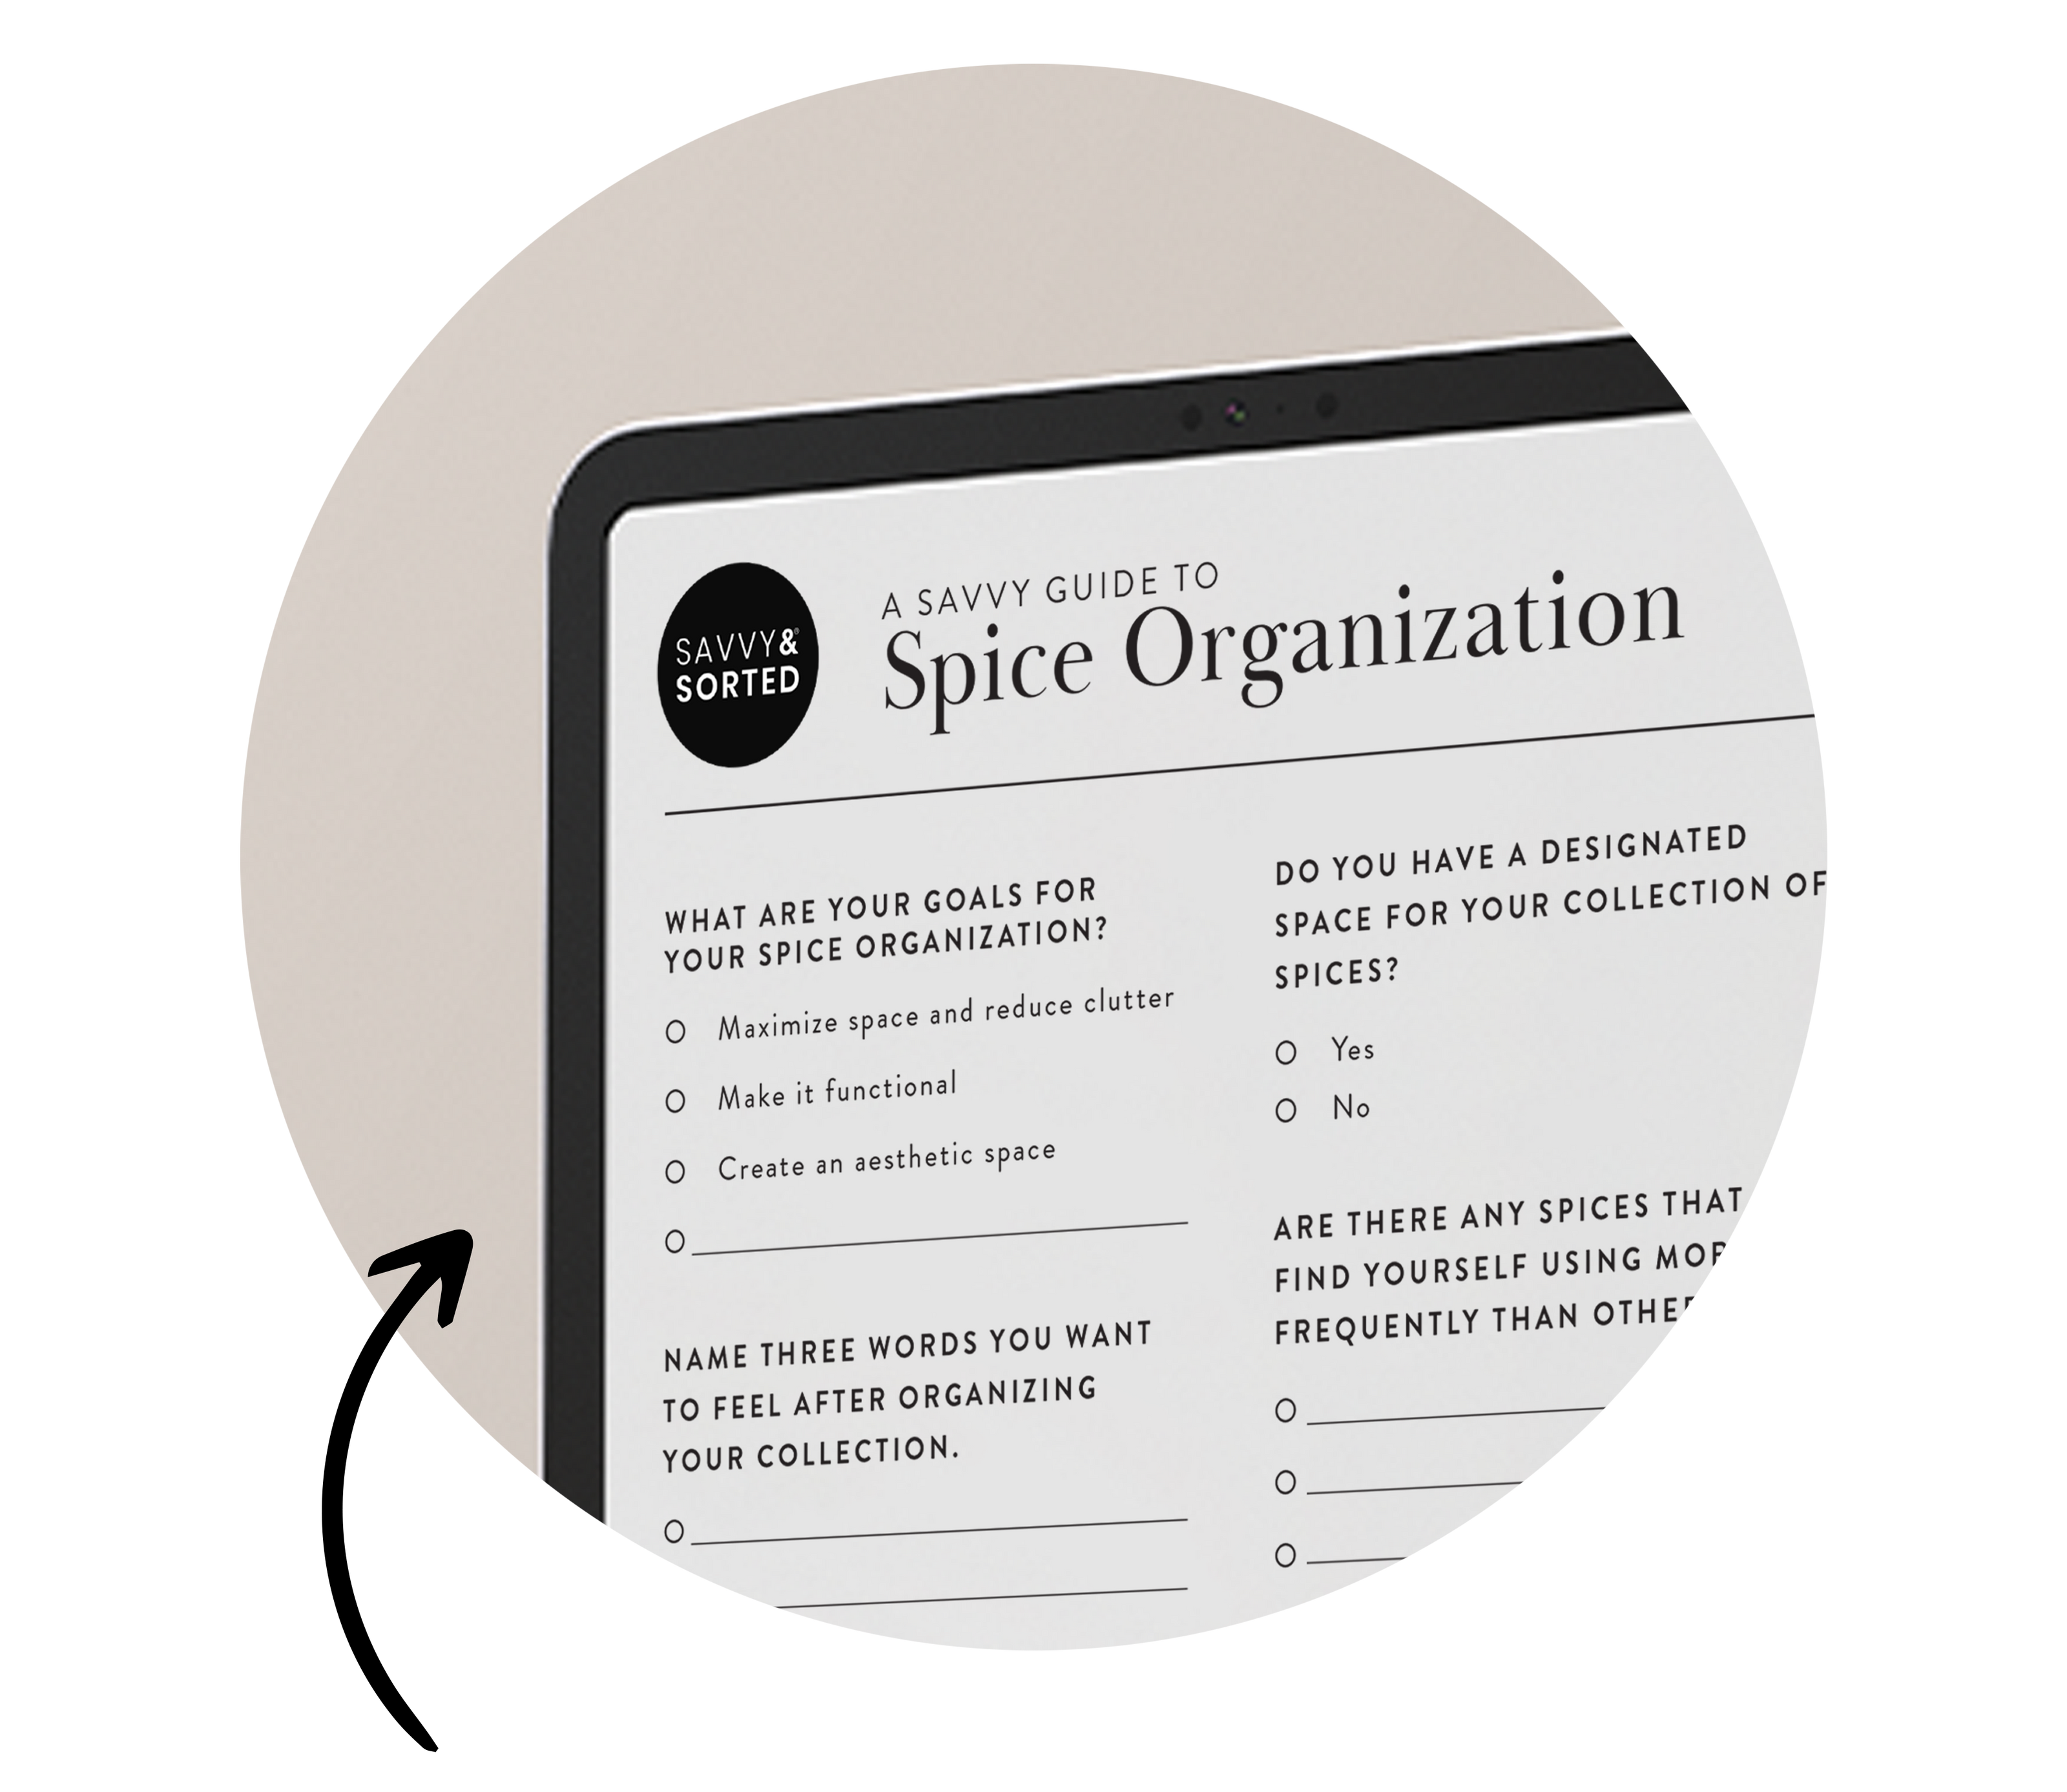 ICON 1-THE DIGITAL SPICE LIST.png__PID:0322ad2c-7b90-4e3a-bfd9-49300b4ea014